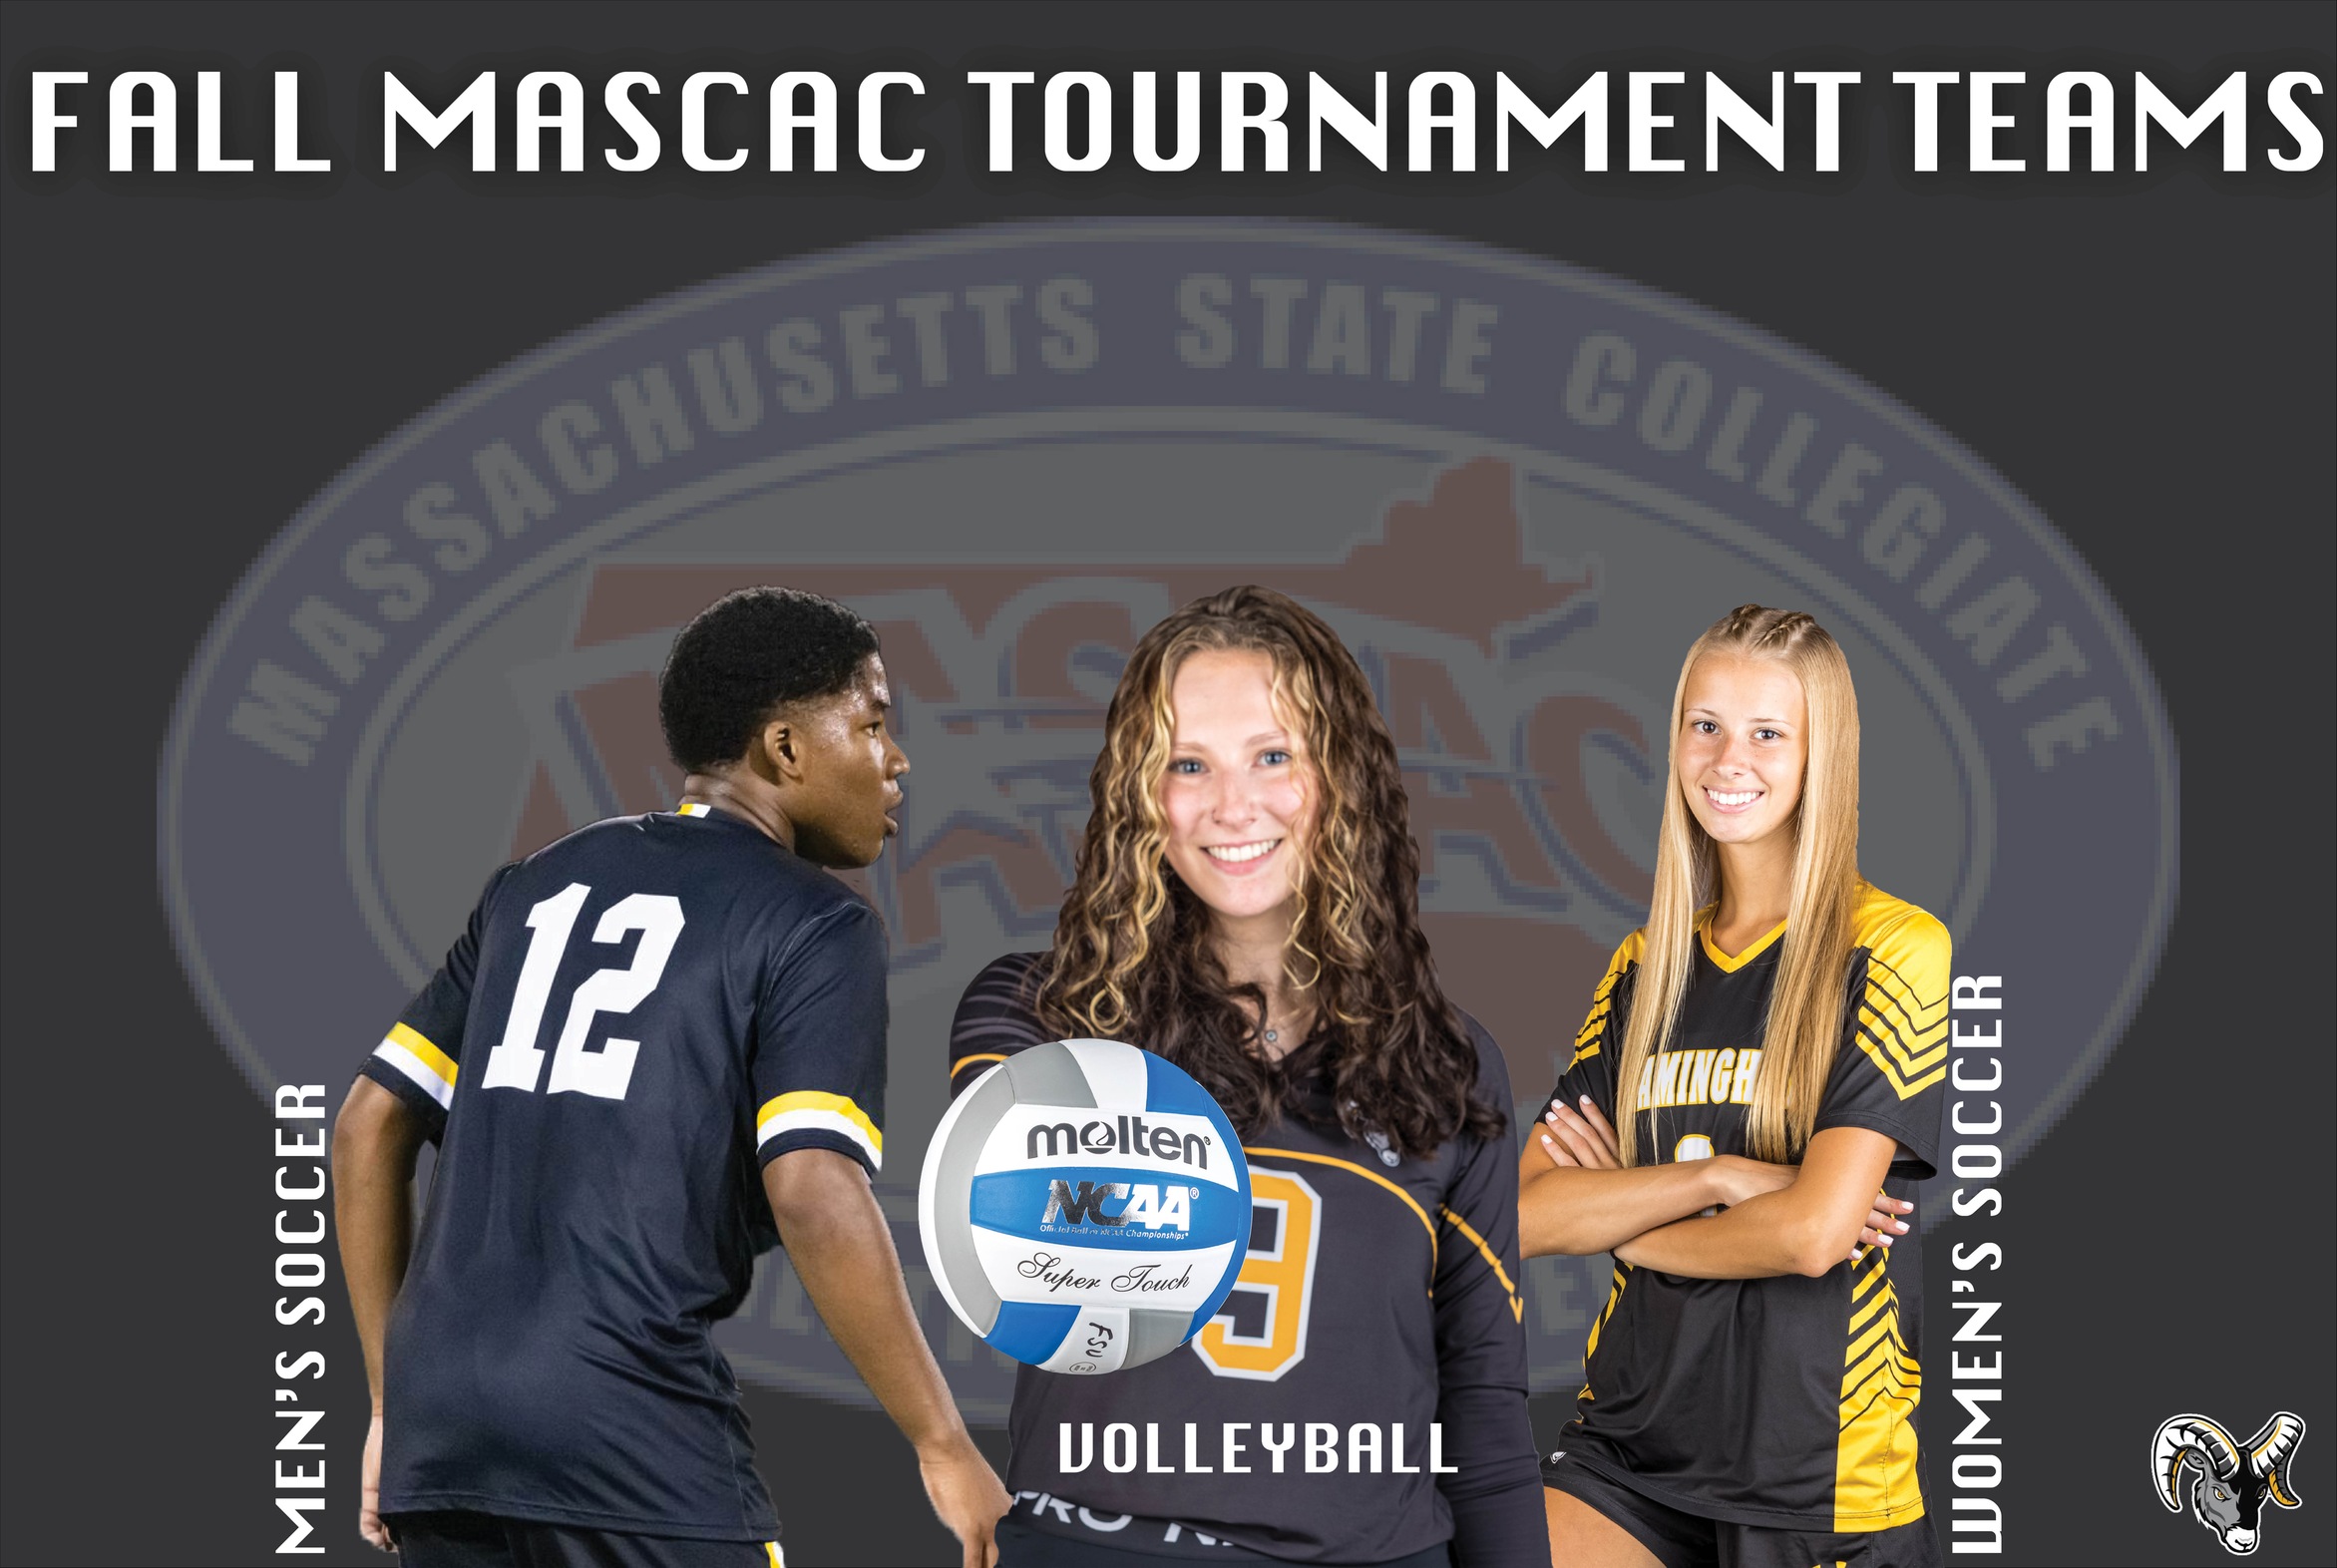 Men's Soccer, Volleyball and Women's Soccer to Compete in This Week's MASCAC Tournaments